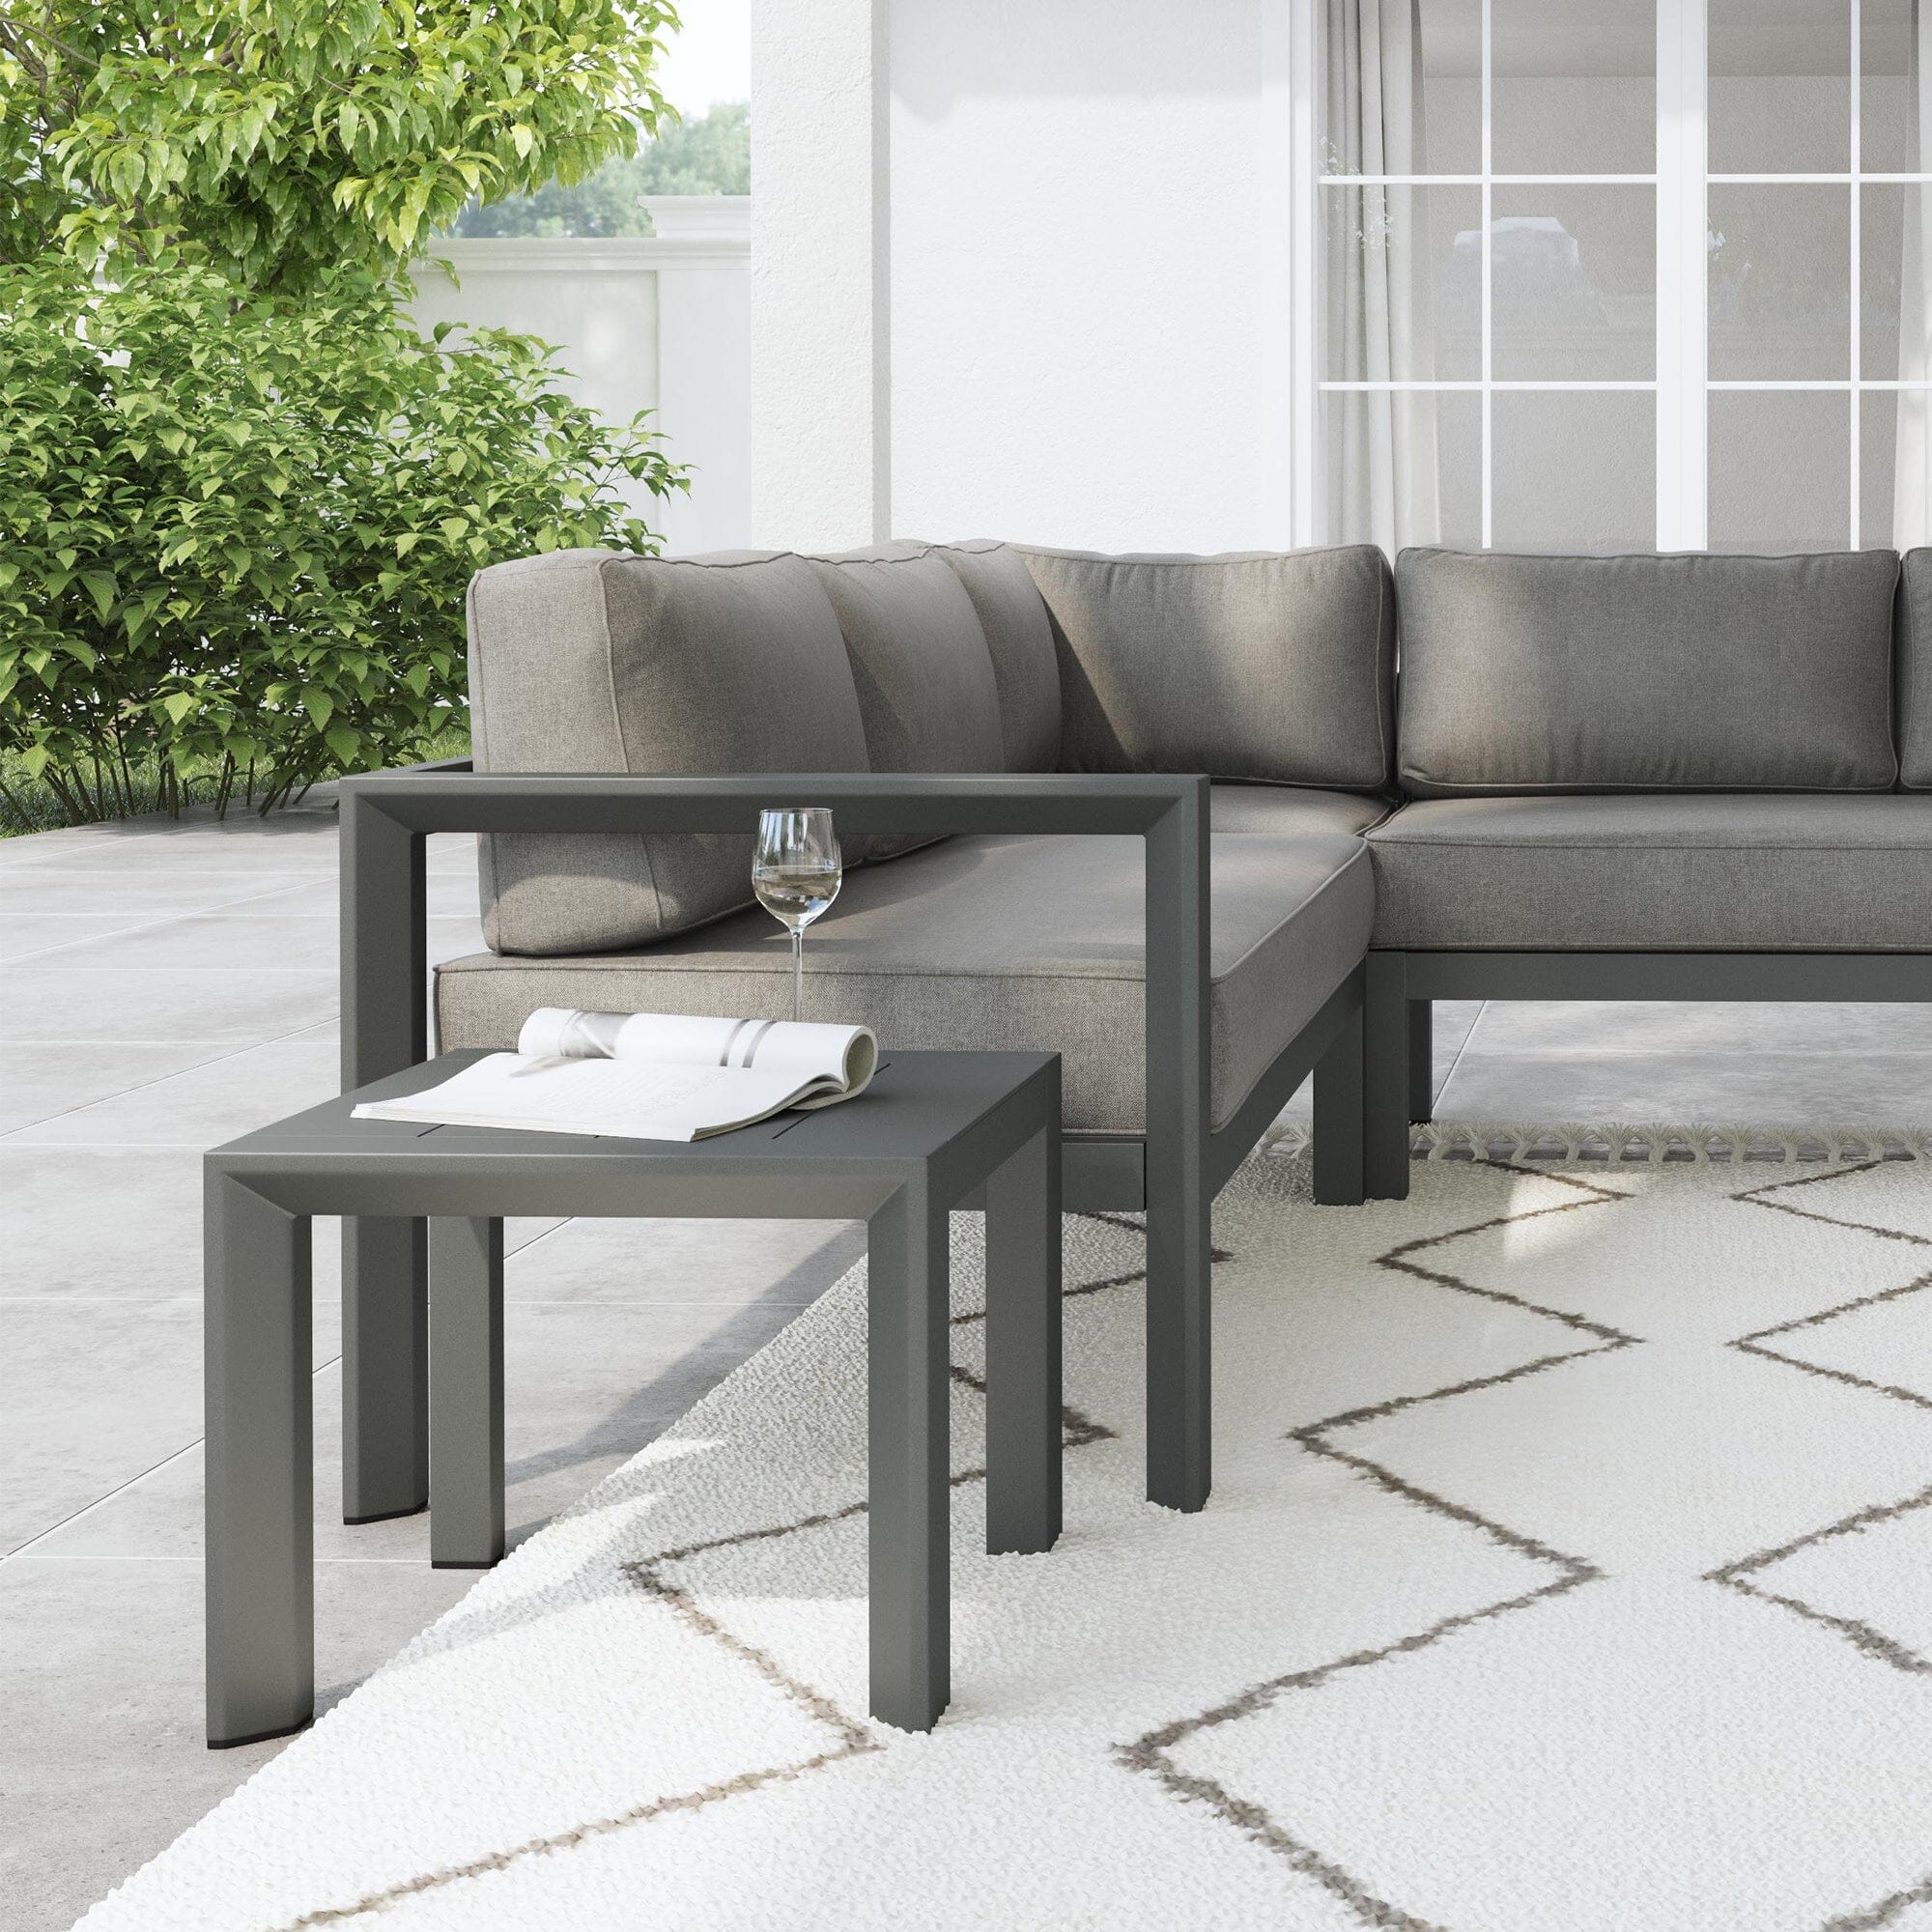 Modern & Contemporary 5 Seat Sectional with 2 End Tables By Grayton Outdoor Seating Grayton